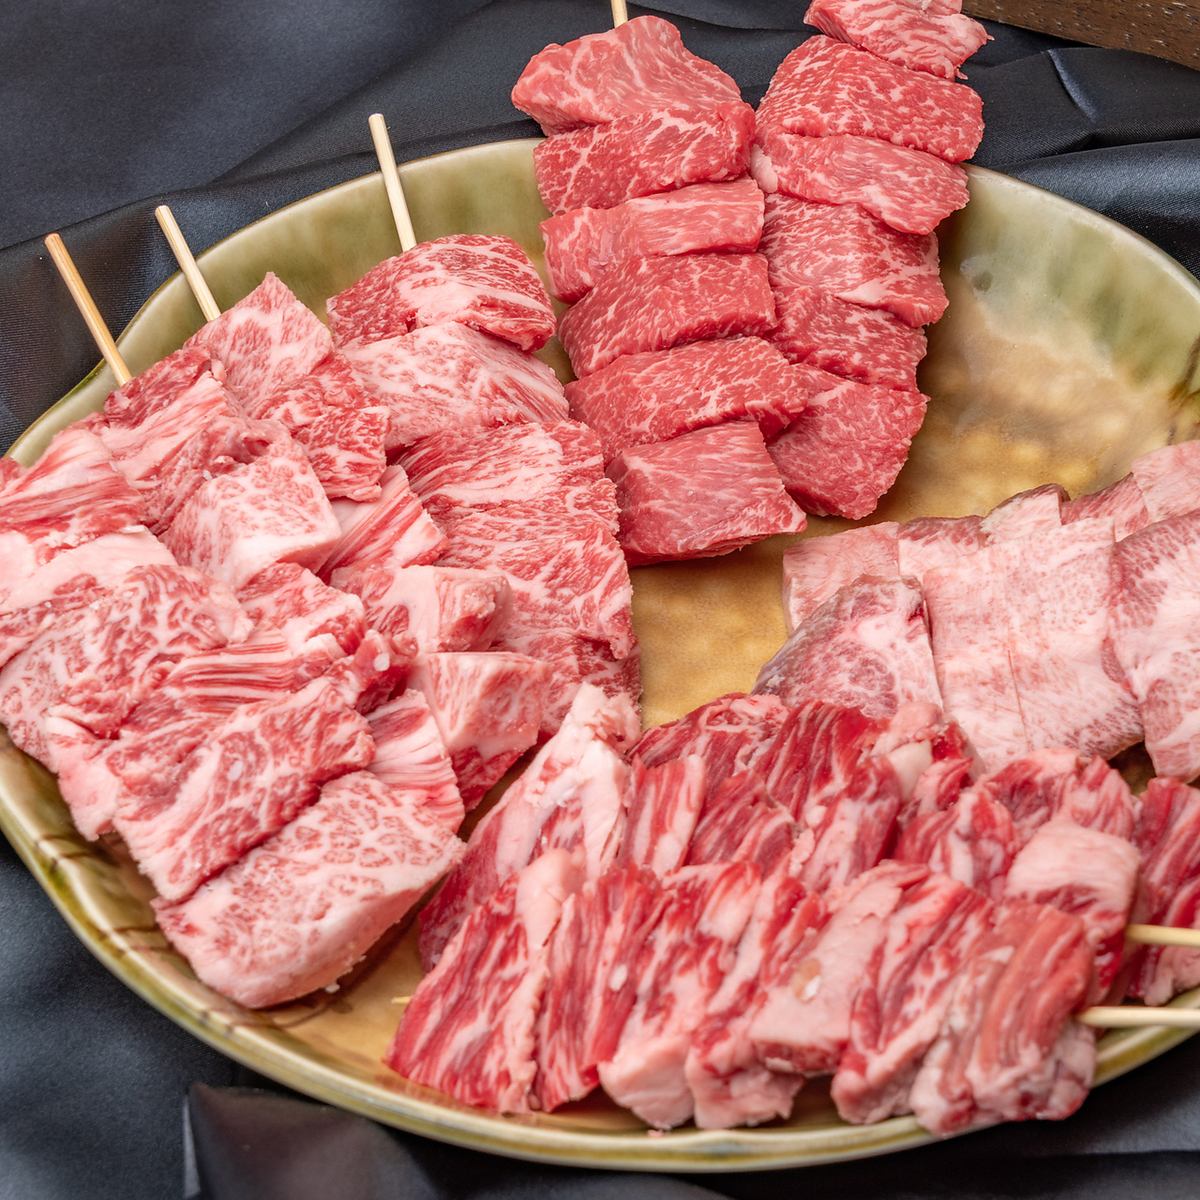 You can enjoy juicy and tender meat that is particular about the ingredients ◎